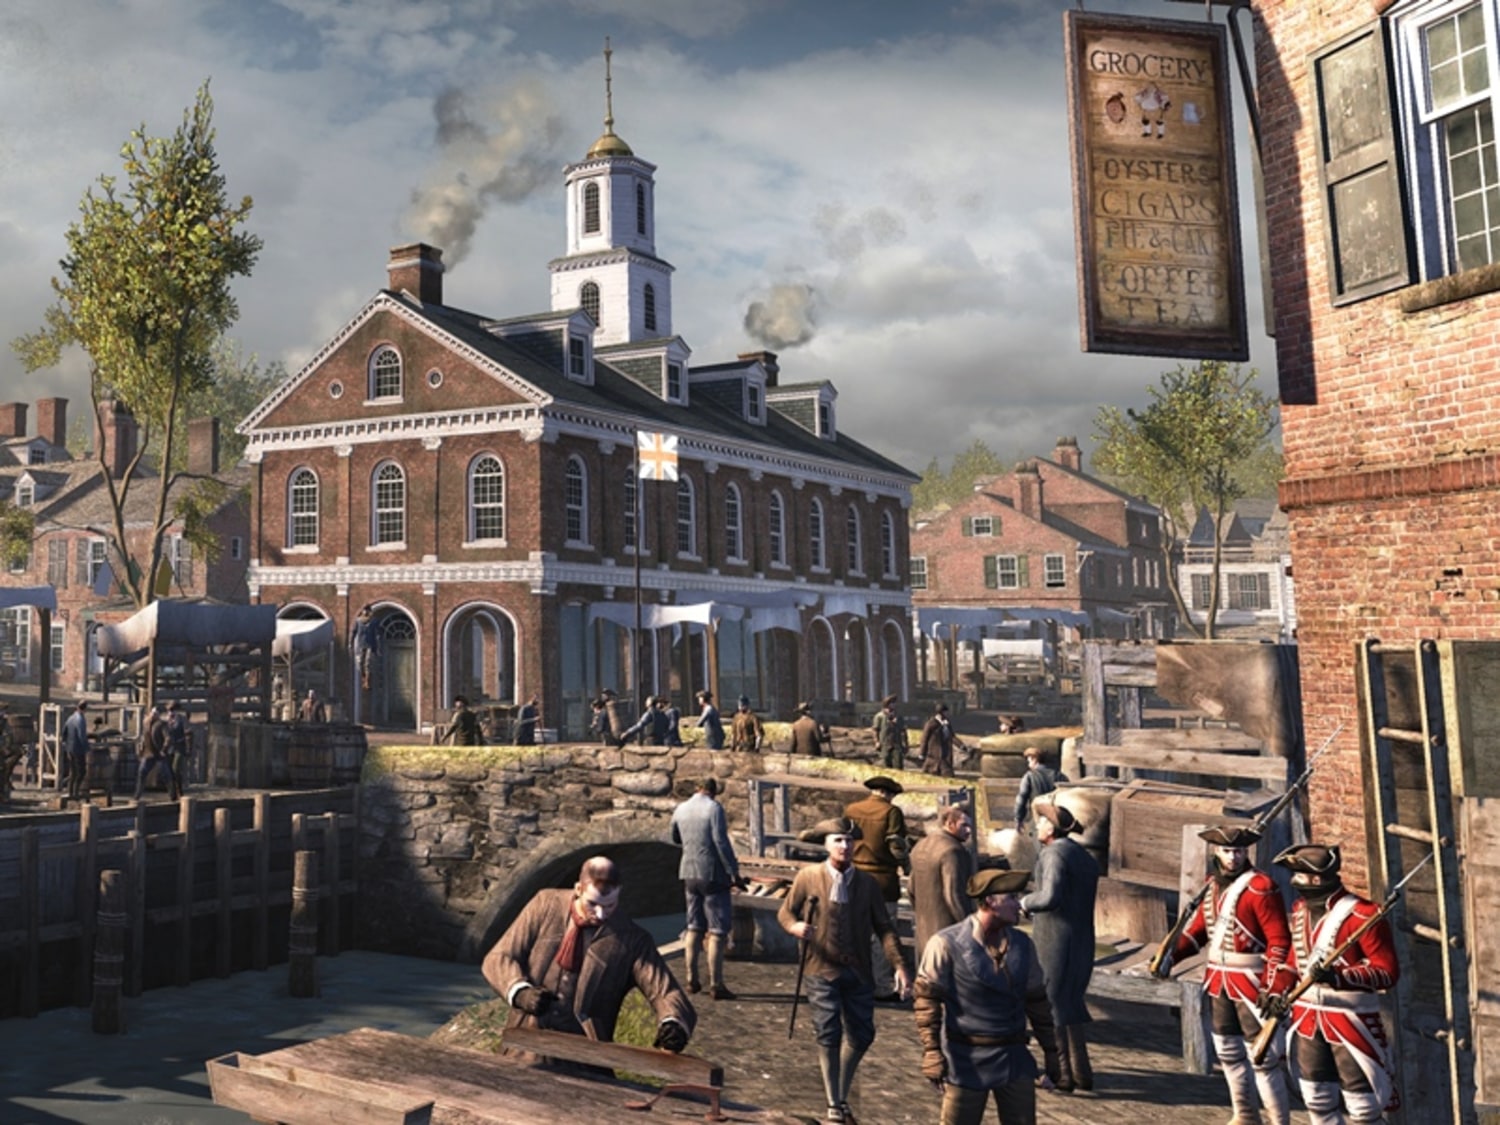 Assassin's Creed III – Lexington and Concord